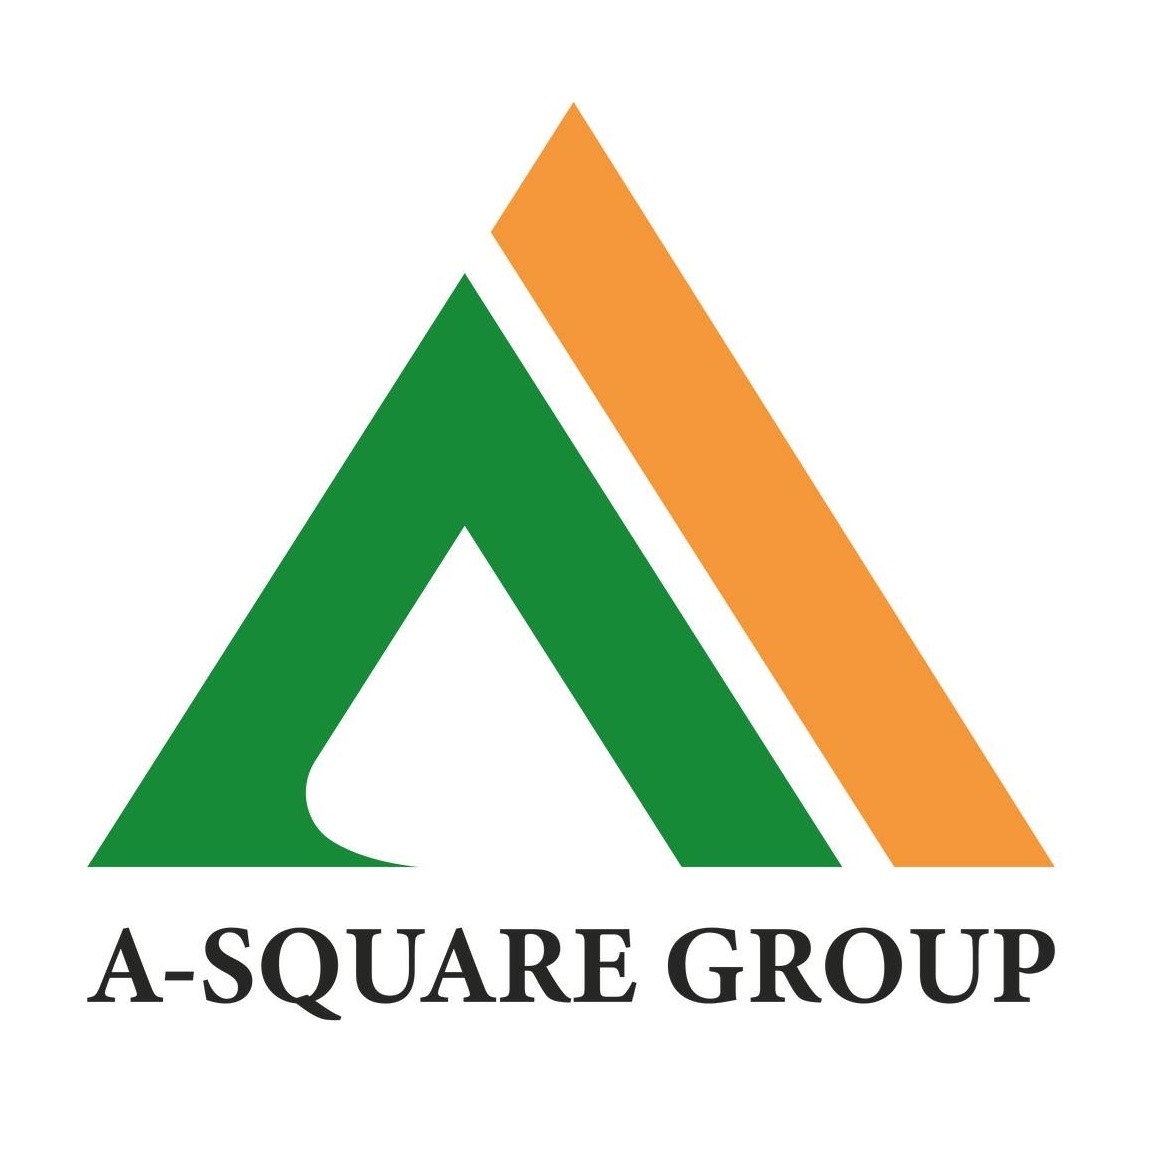 A-SQUARE GROUP